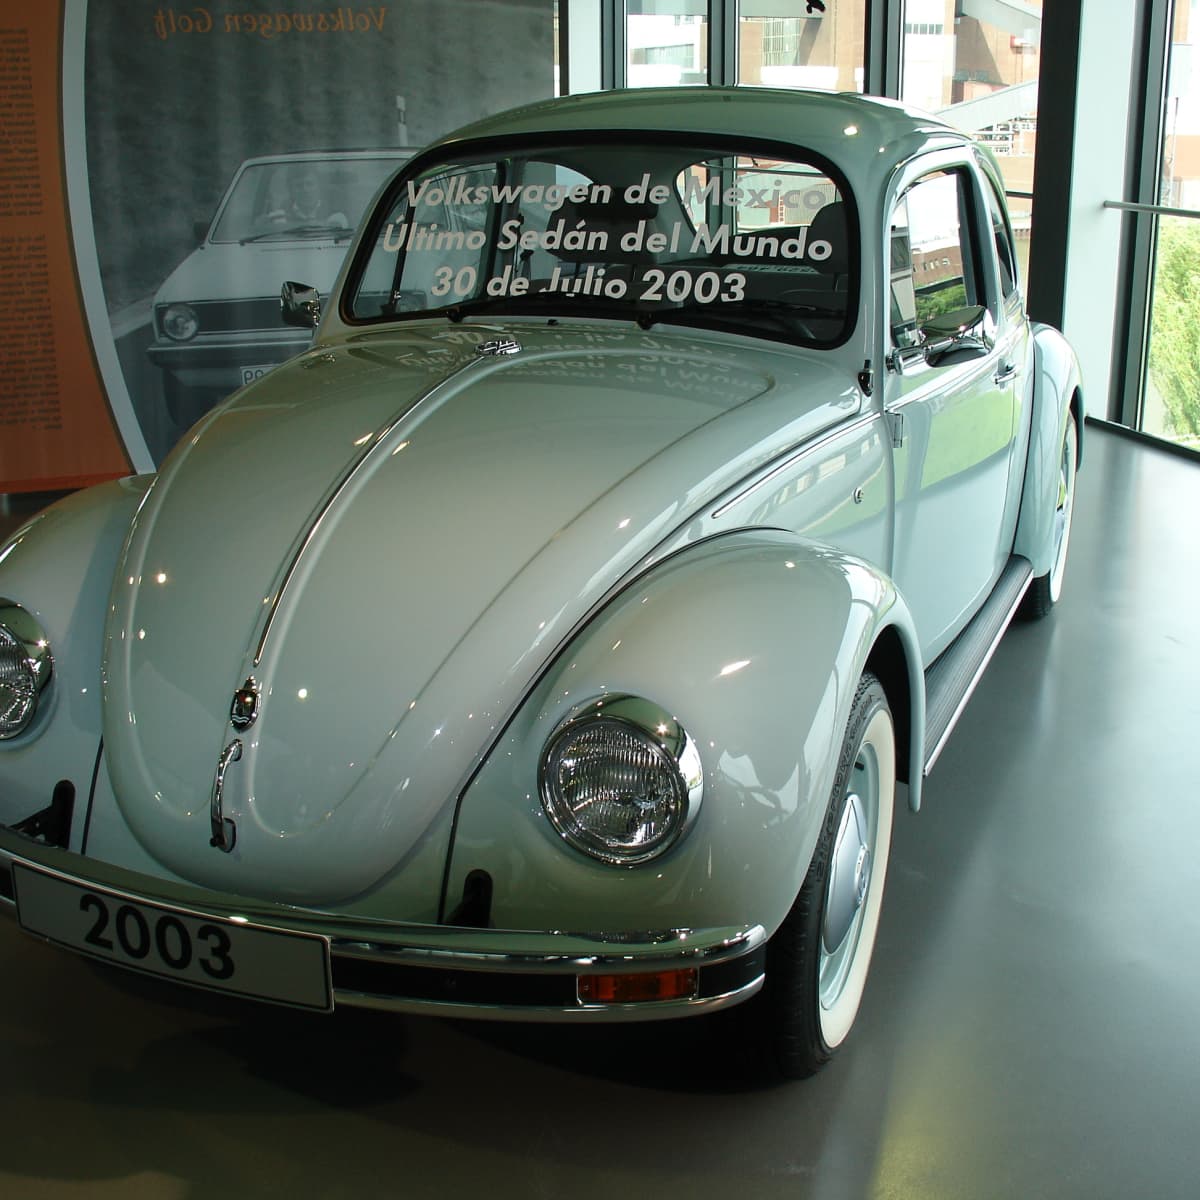 Flipping Classic Vw Beetle Cars For A Living - Axleaddict